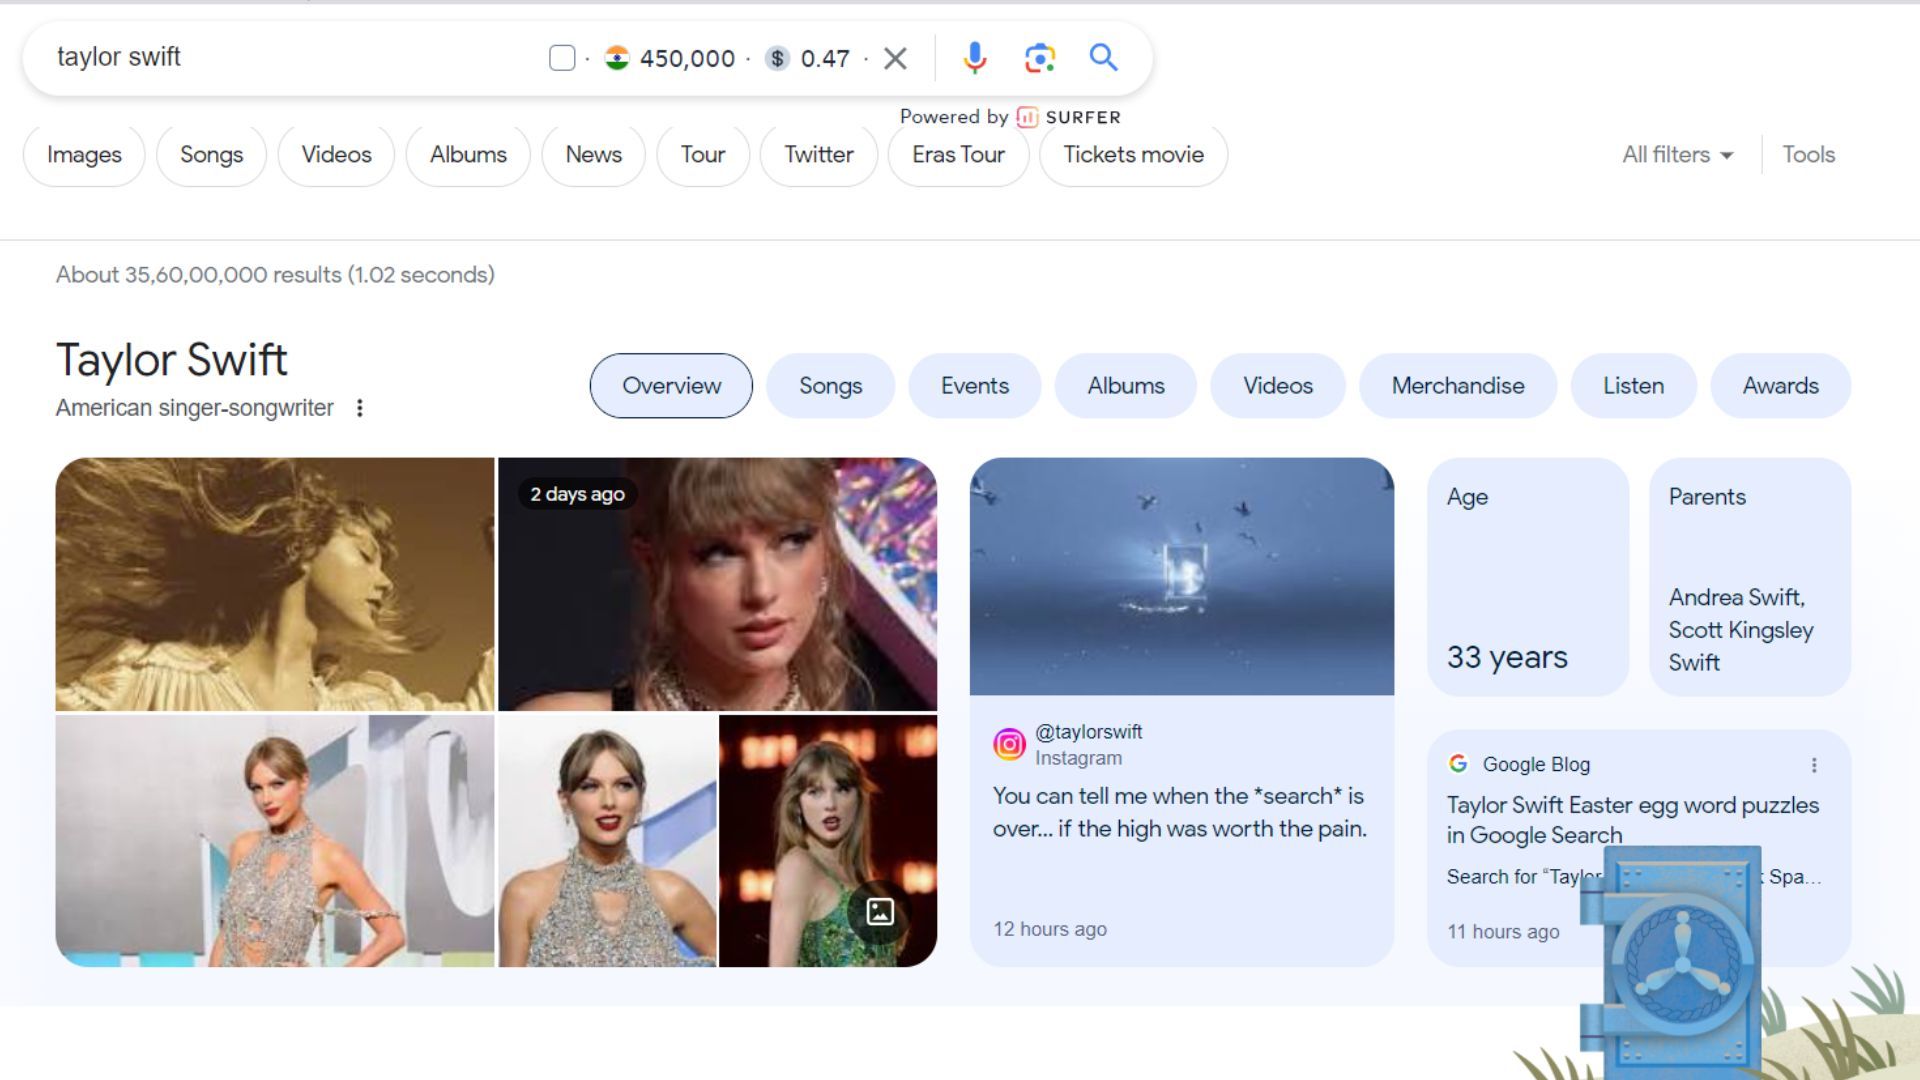 Taylor Swift 1989 Google vault puzzle solved - what is she up to?